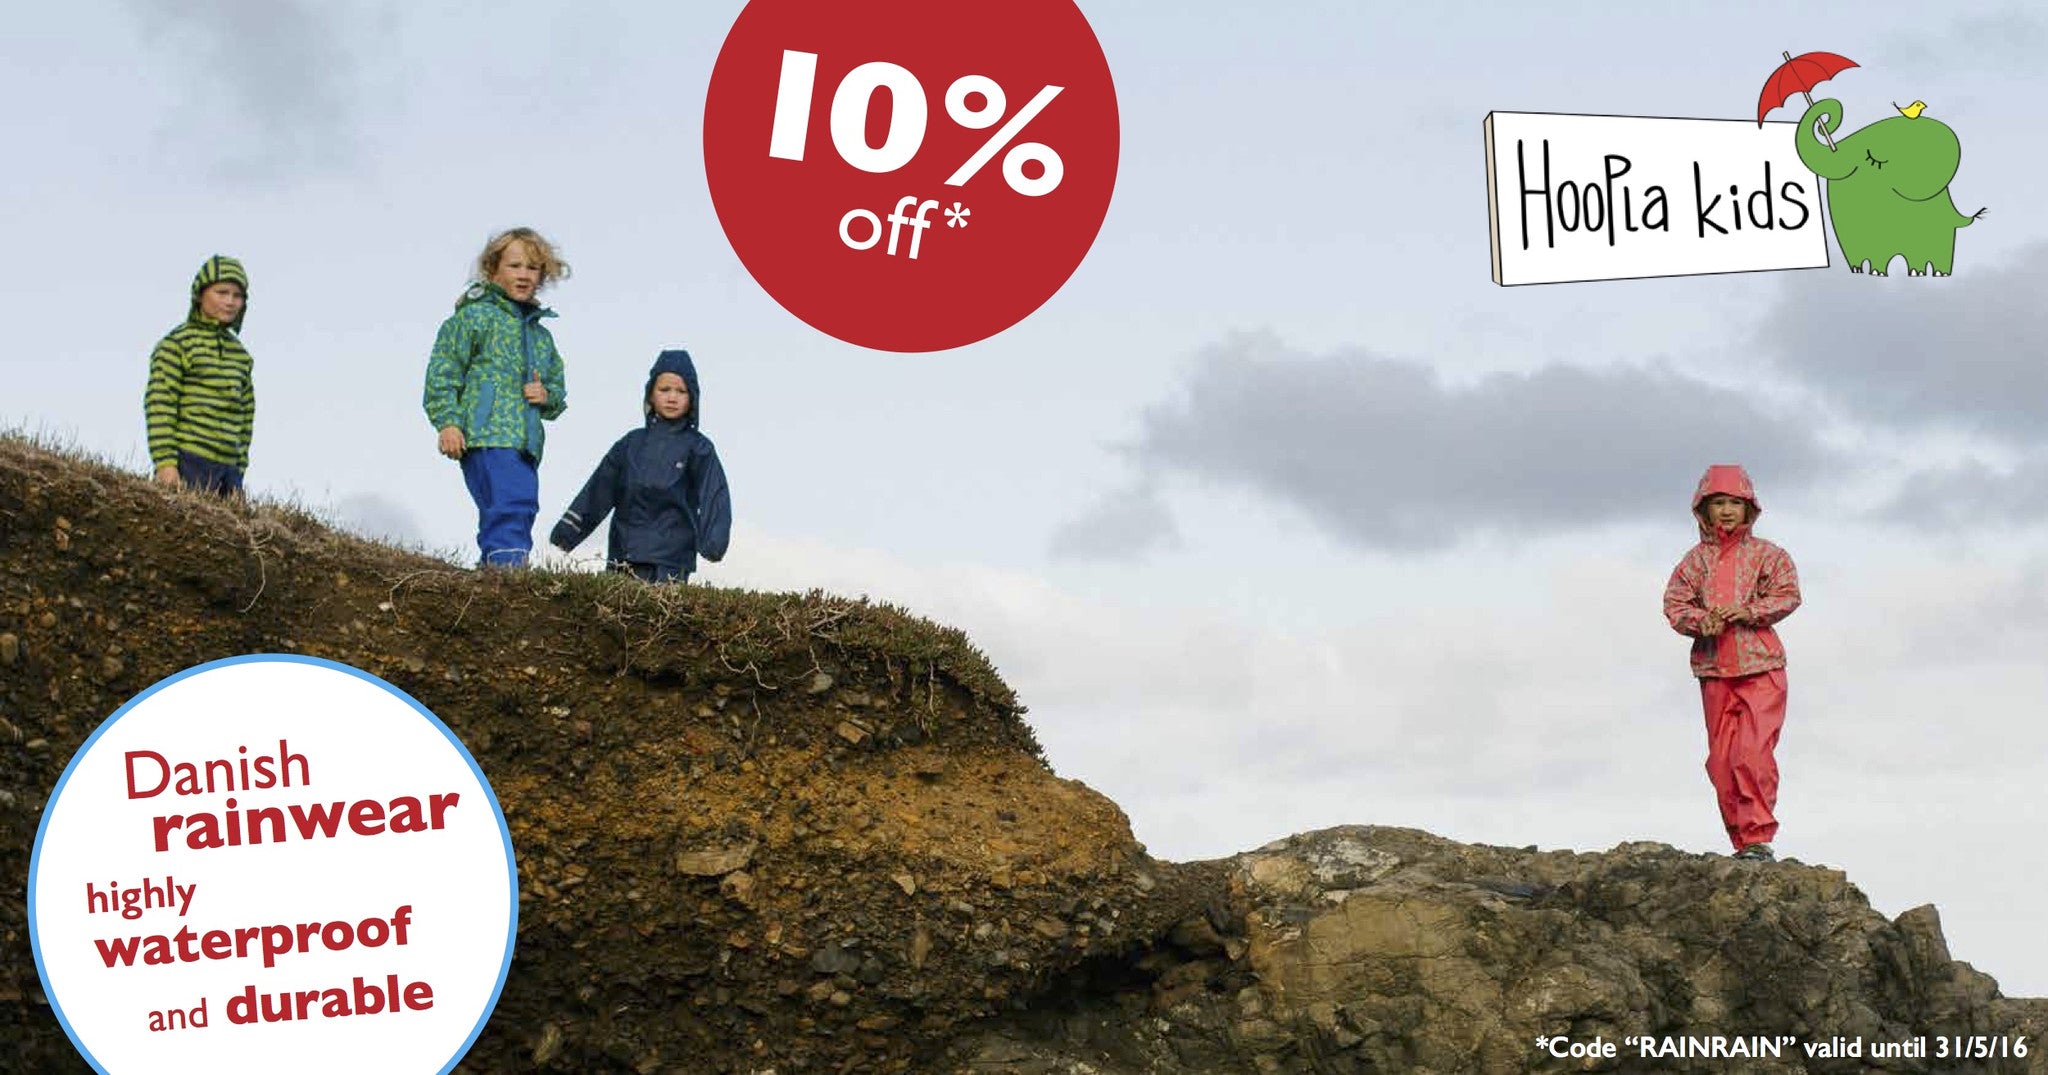 Is it winter where you are? Get 10% off Rainwear